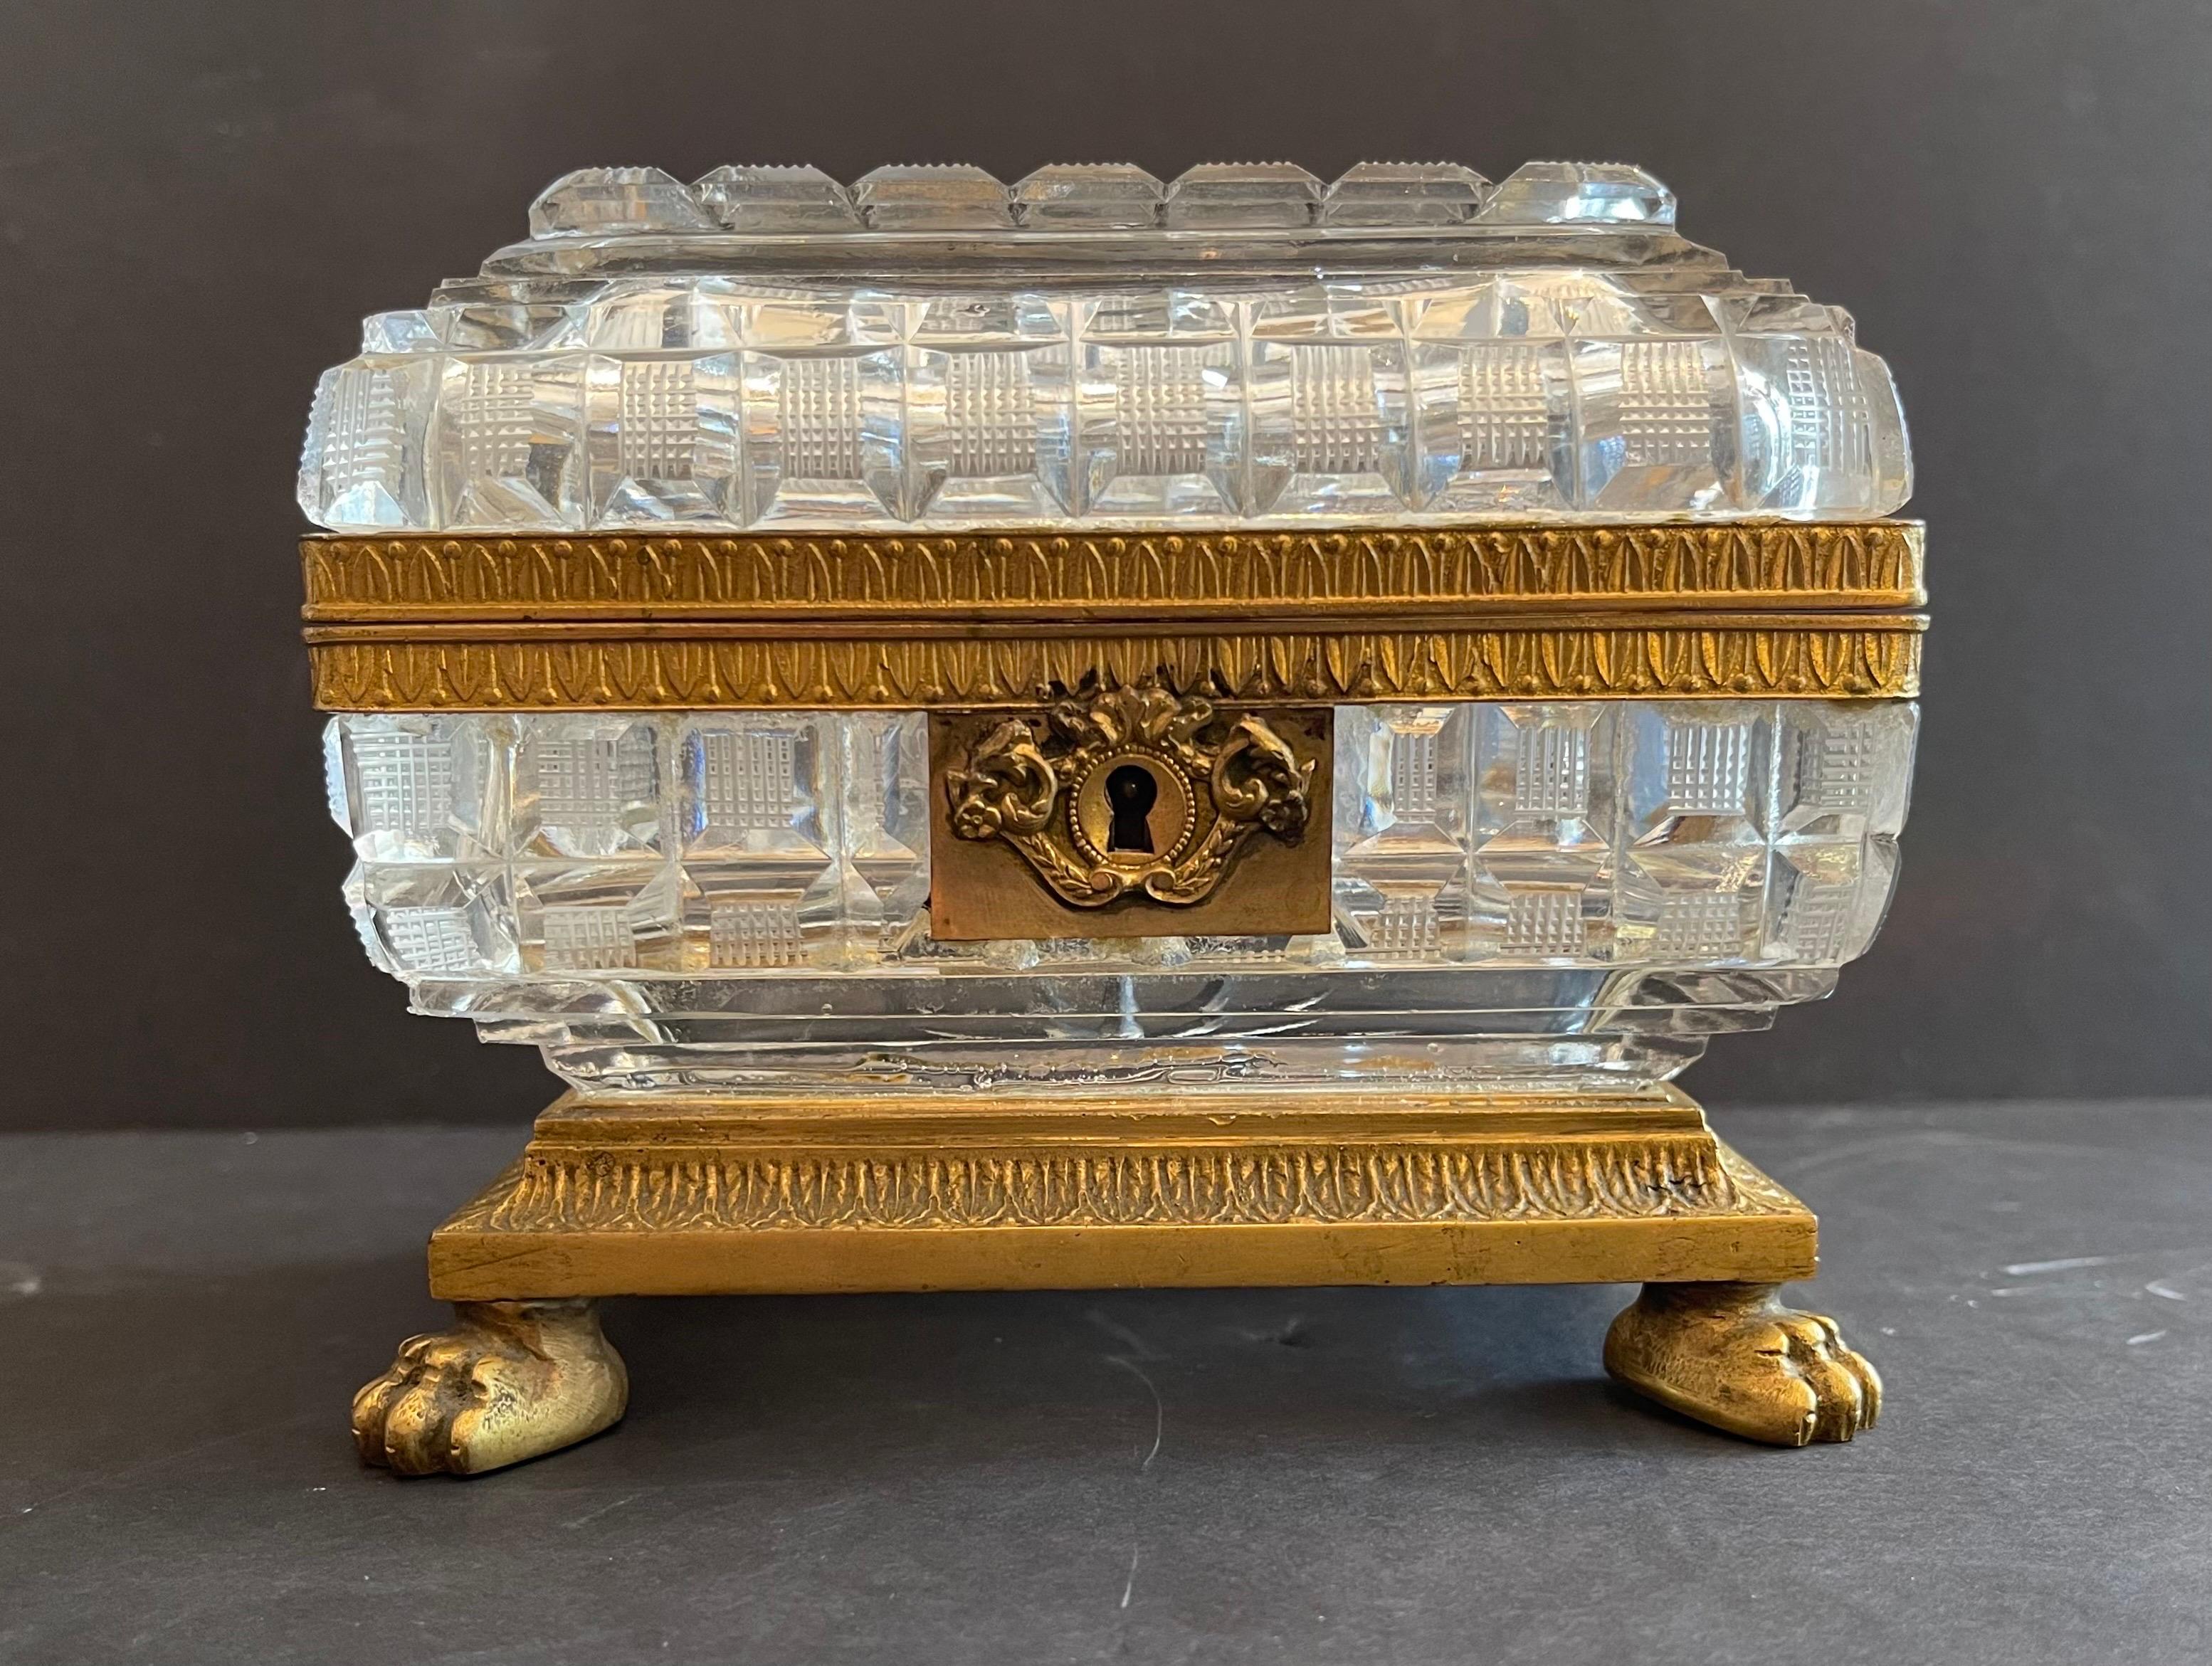 A Very Fine French Empire / Neoclassical Style Bronze Ormolu Mounted & Faceted Cut Crystal Jewelry Box / Casket In The Manner Of Baccarat.